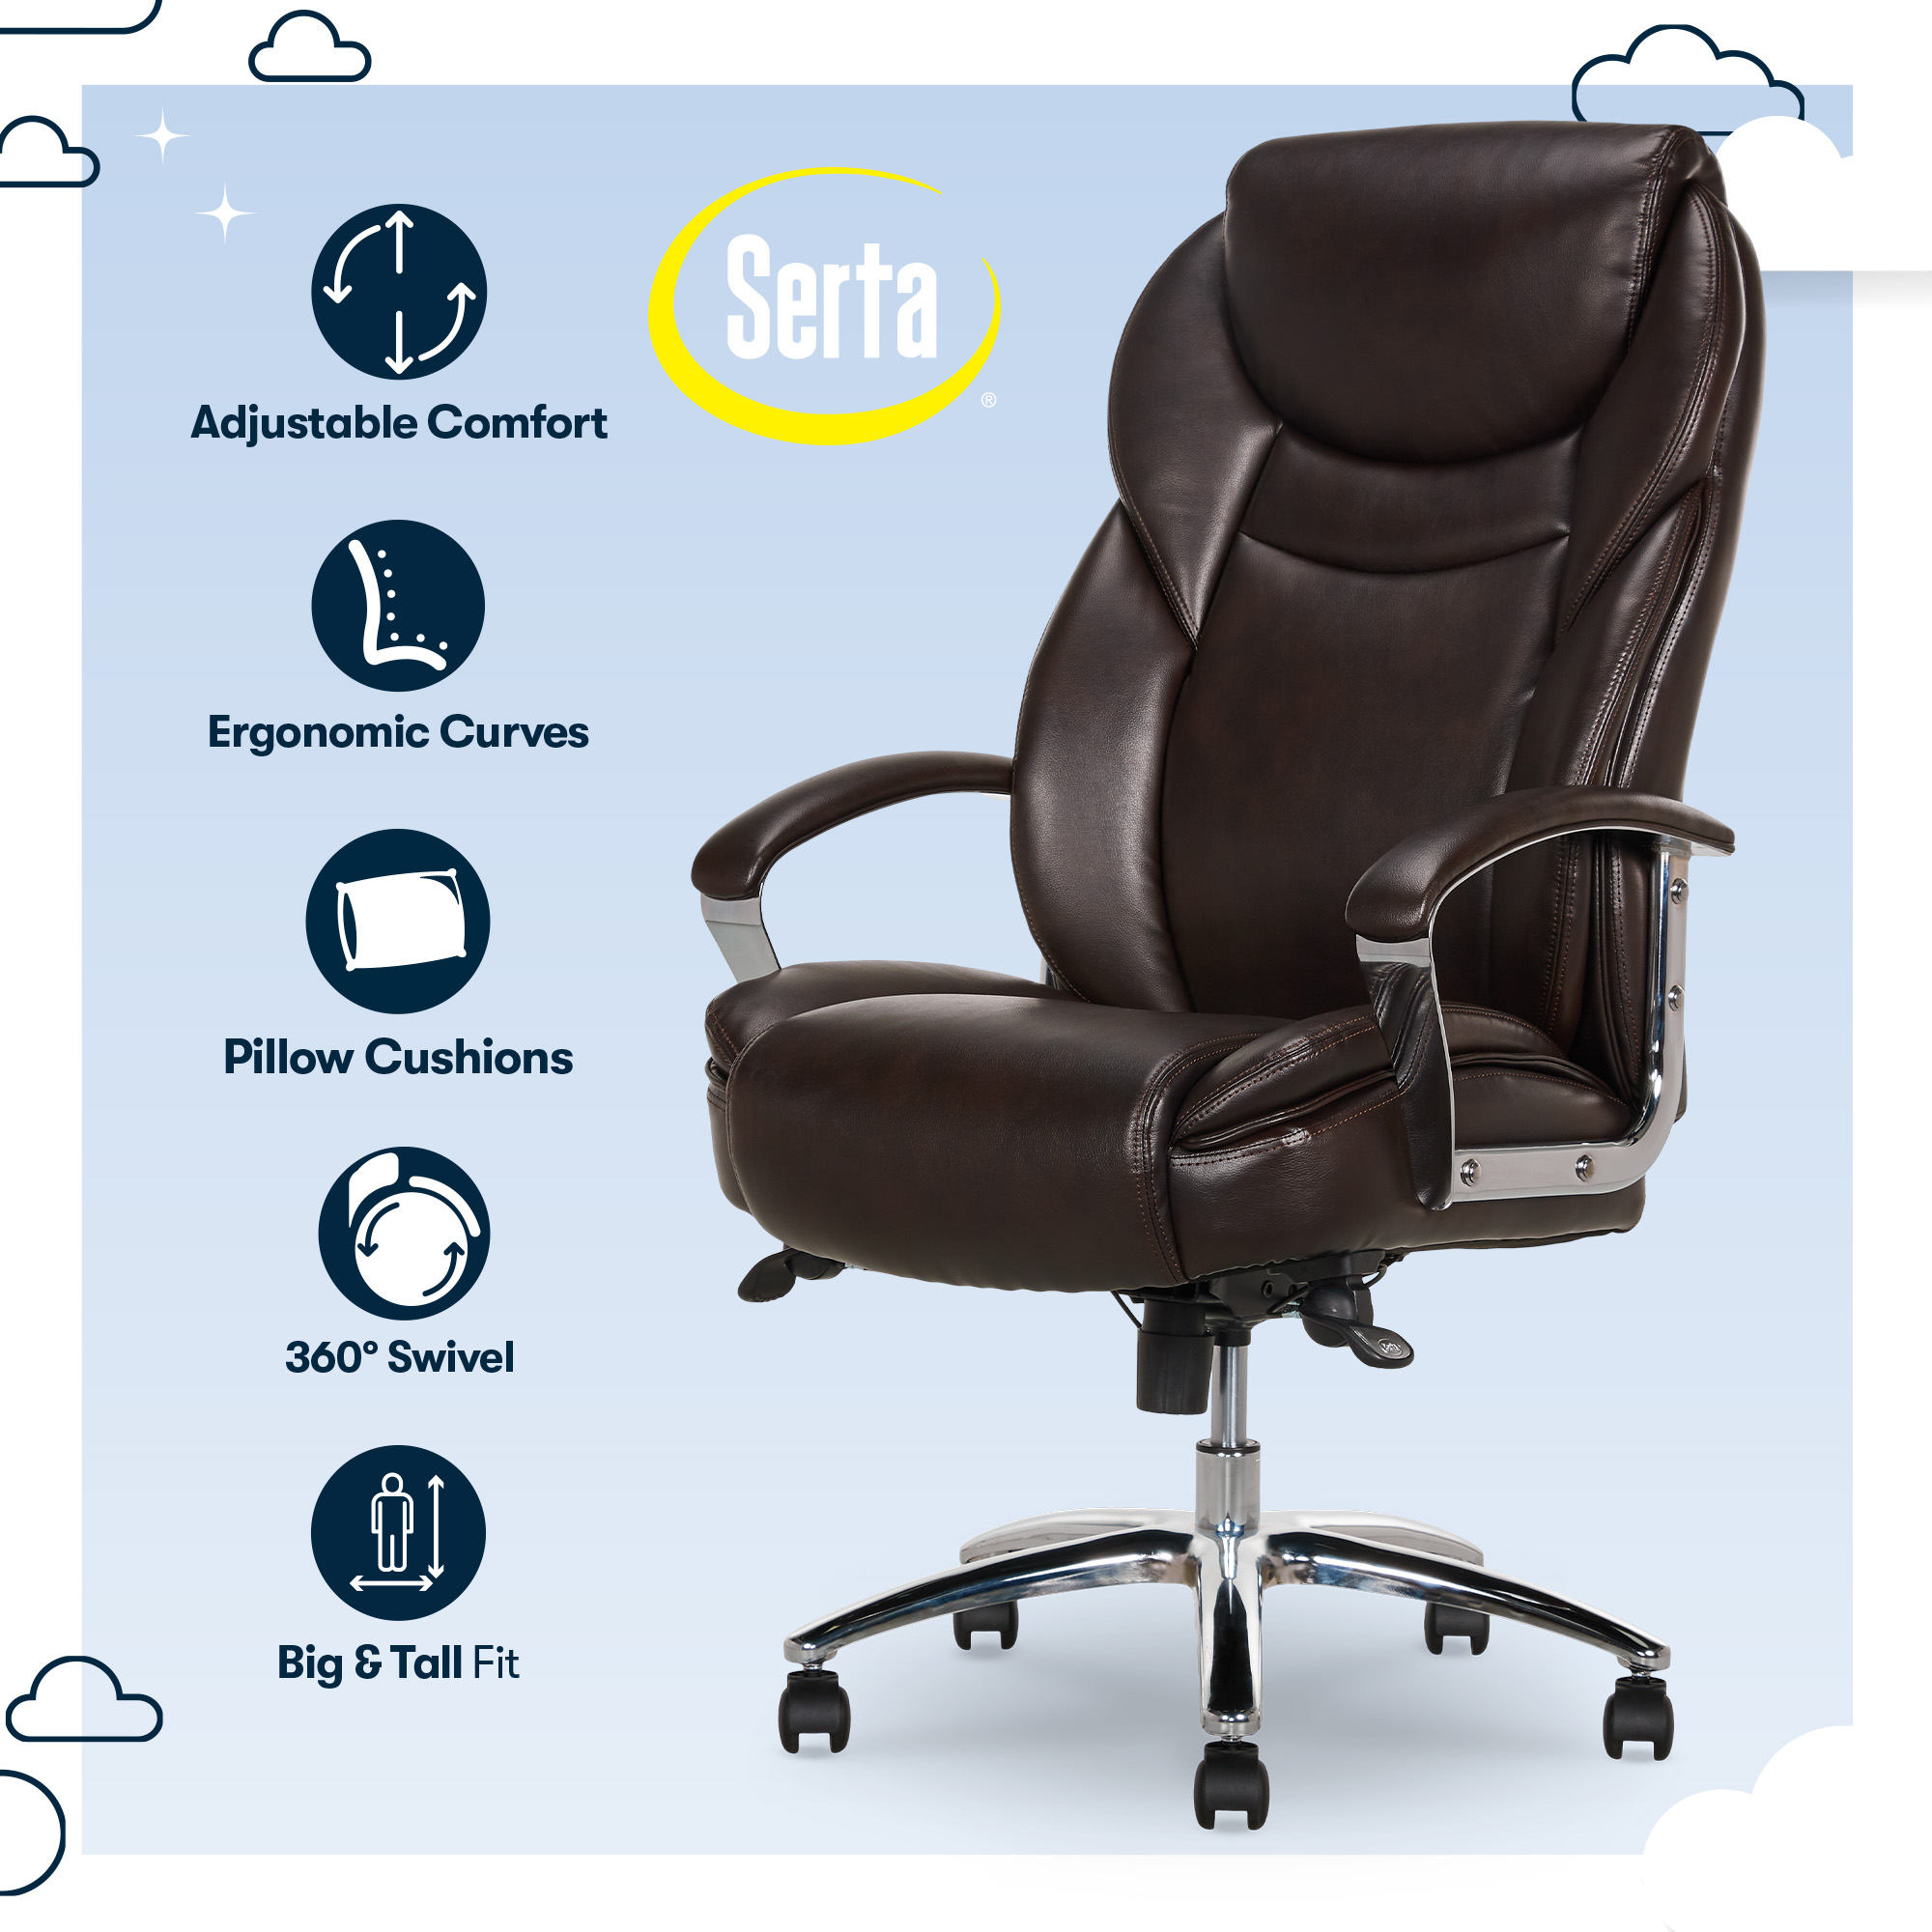 Serta Big & Tall High Back Office Chair, Heavy Duty Weight Rating, Brown Bonded Leather Upholstery - image 2 of 14